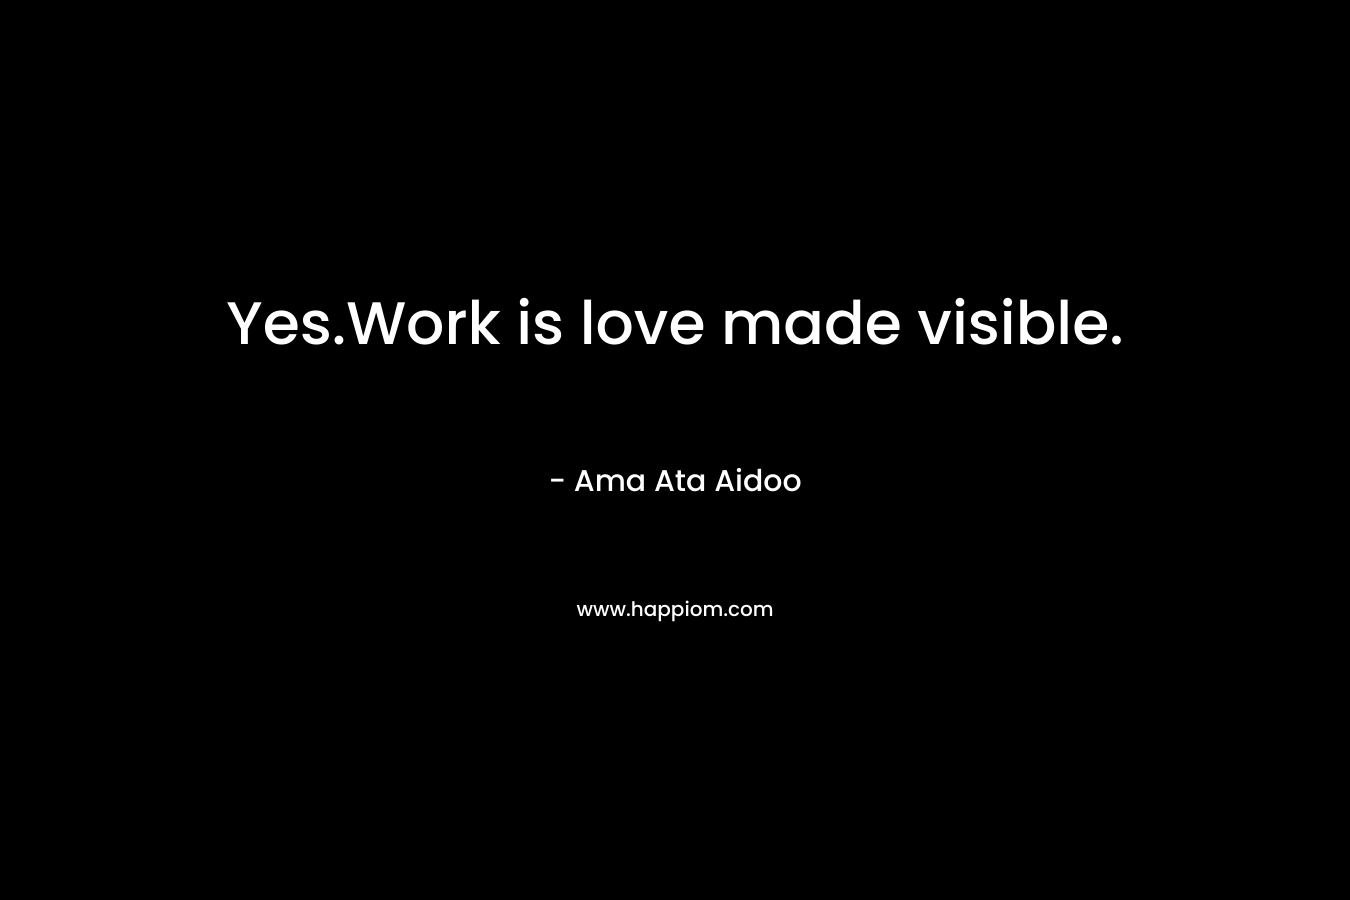 Yes.Work is love made visible.